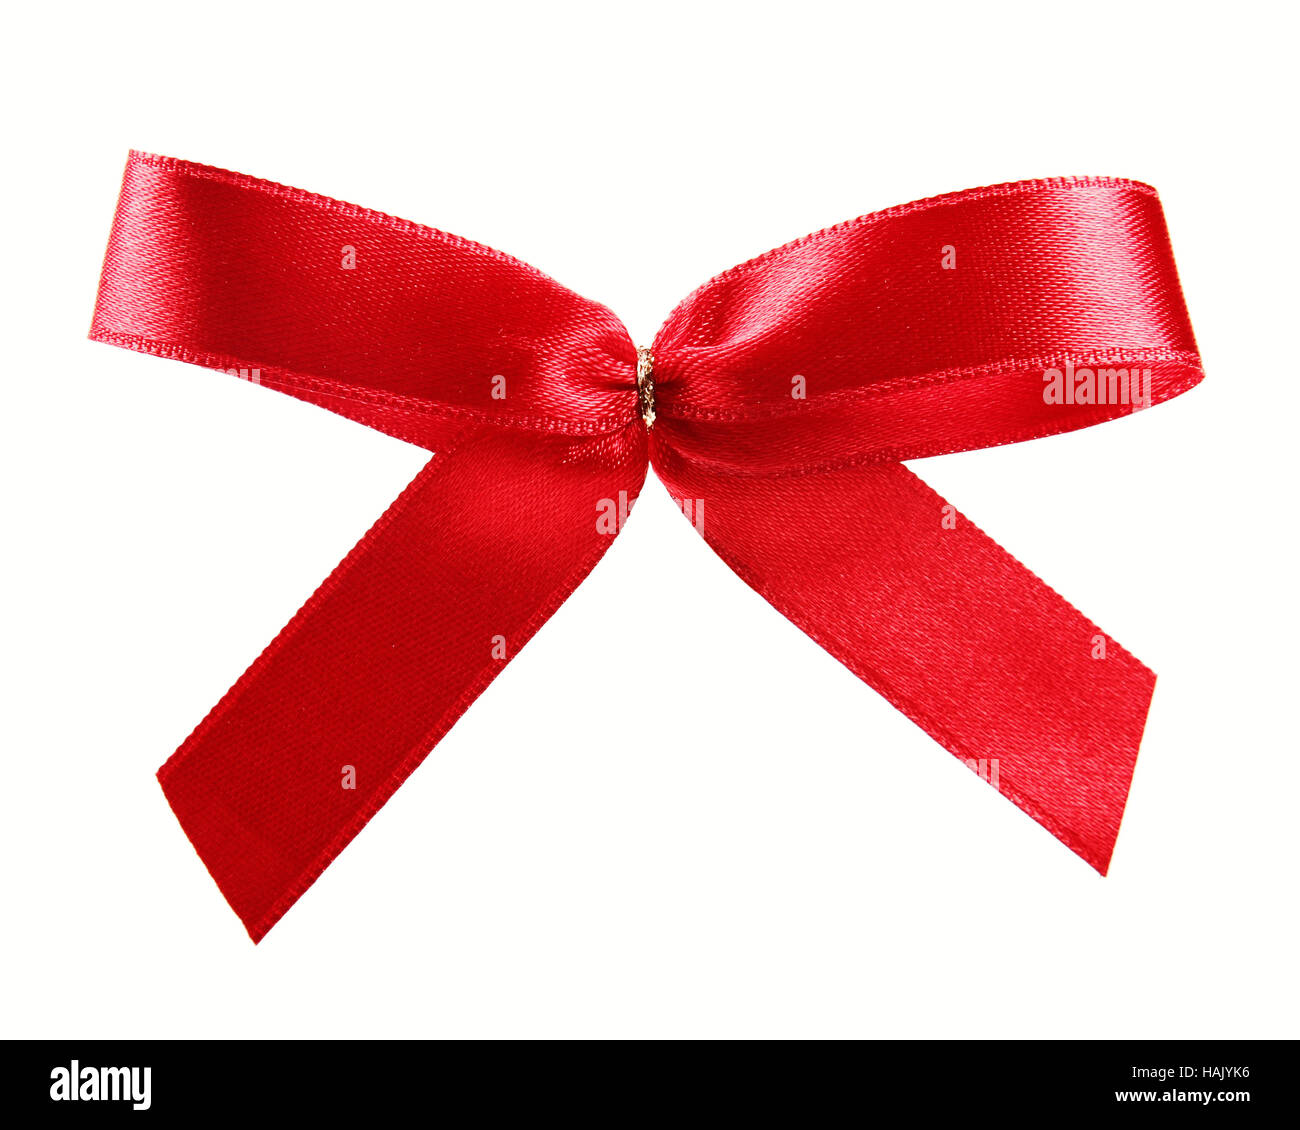 Ruban de satin rouge gift bow isolated on white Banque D'Images